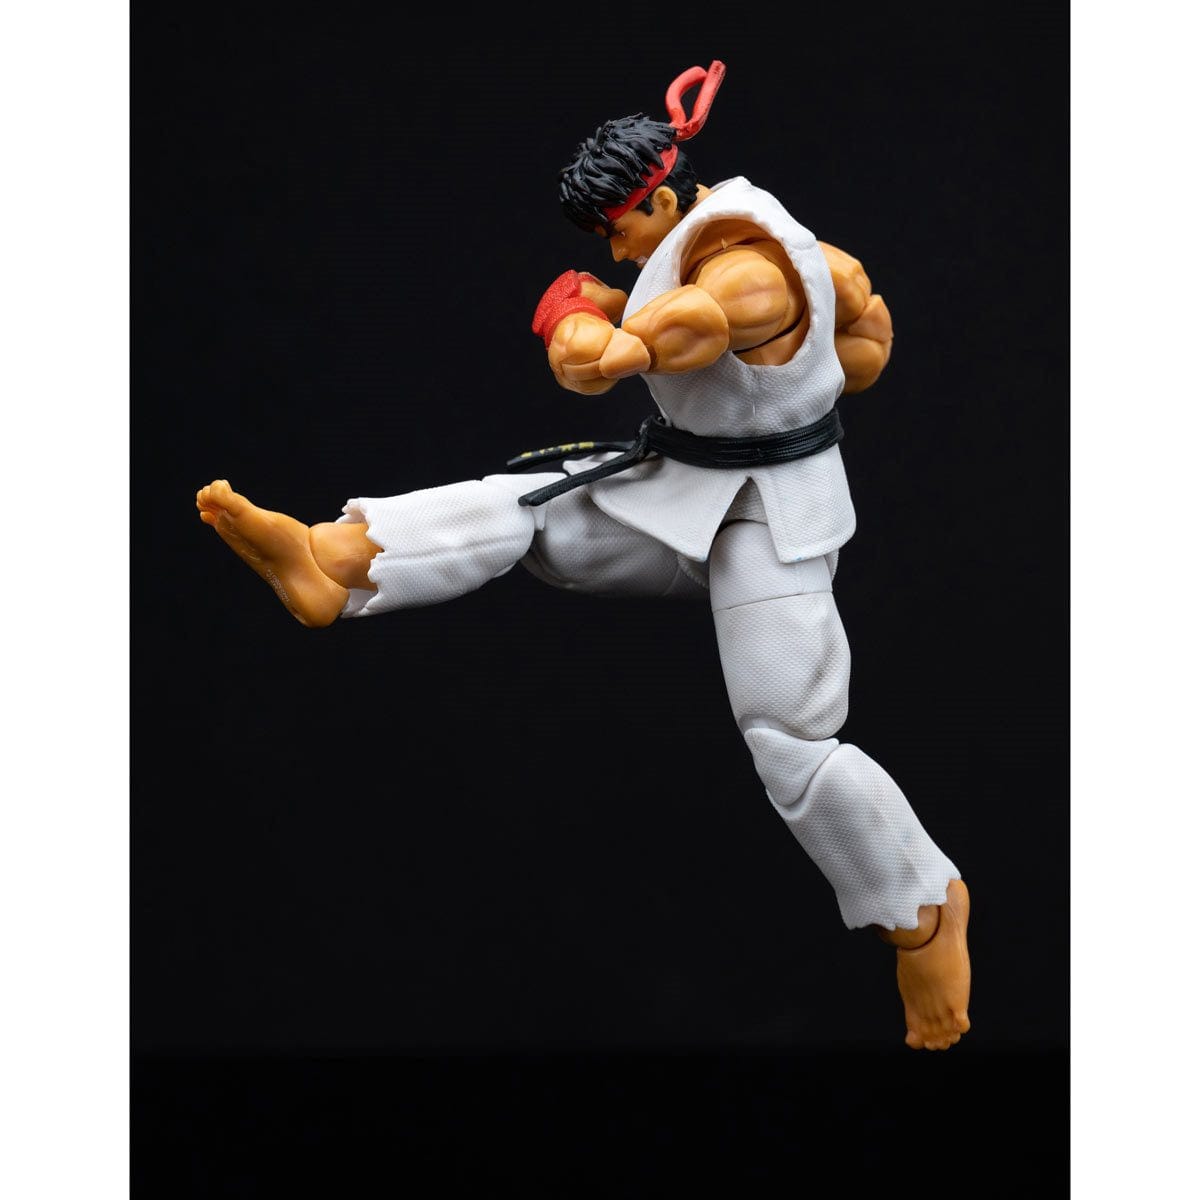 Player Select Street Fighter IV Ryu Action Figure